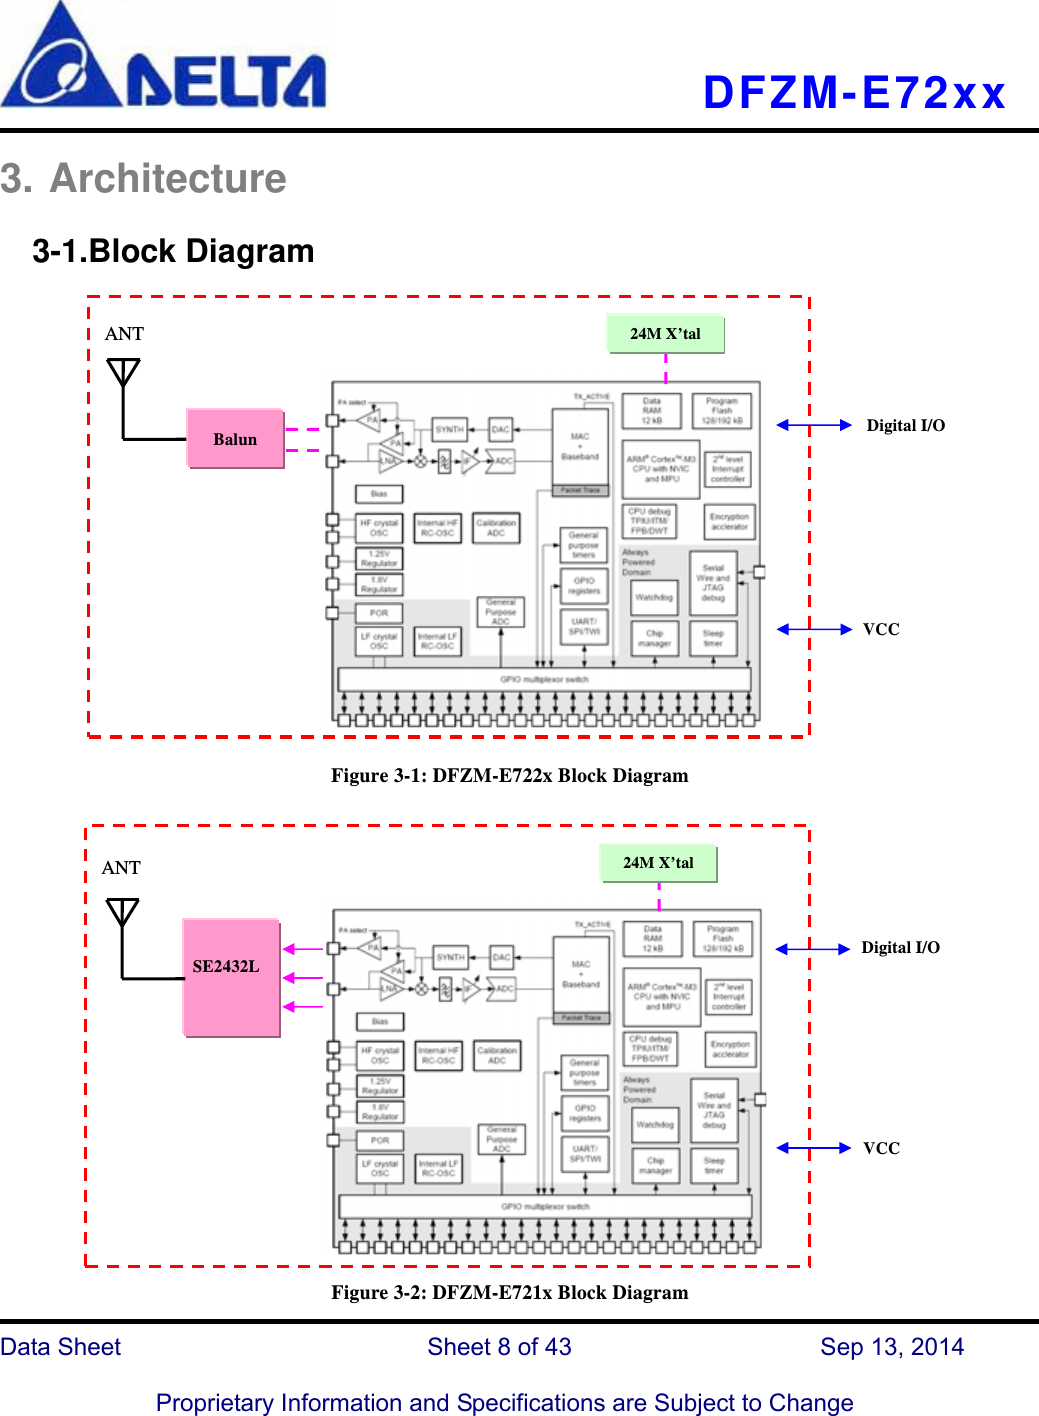   DFZM-E72xx   Data Sheet                 Sheet 8 of 43           Sep 13, 2014  Proprietary Information and Specifications are Subject to Change 3. Architecture 3-1.Block Diagram  Figure 3-1: DFZM-E722x Block Diagram    Figure 3-2: DFZM-E721x Block Diagram SE2432L ANT 24M X’tal Balun ANT 24M X’tal Digital I/O VCC VCC Digital I/O 